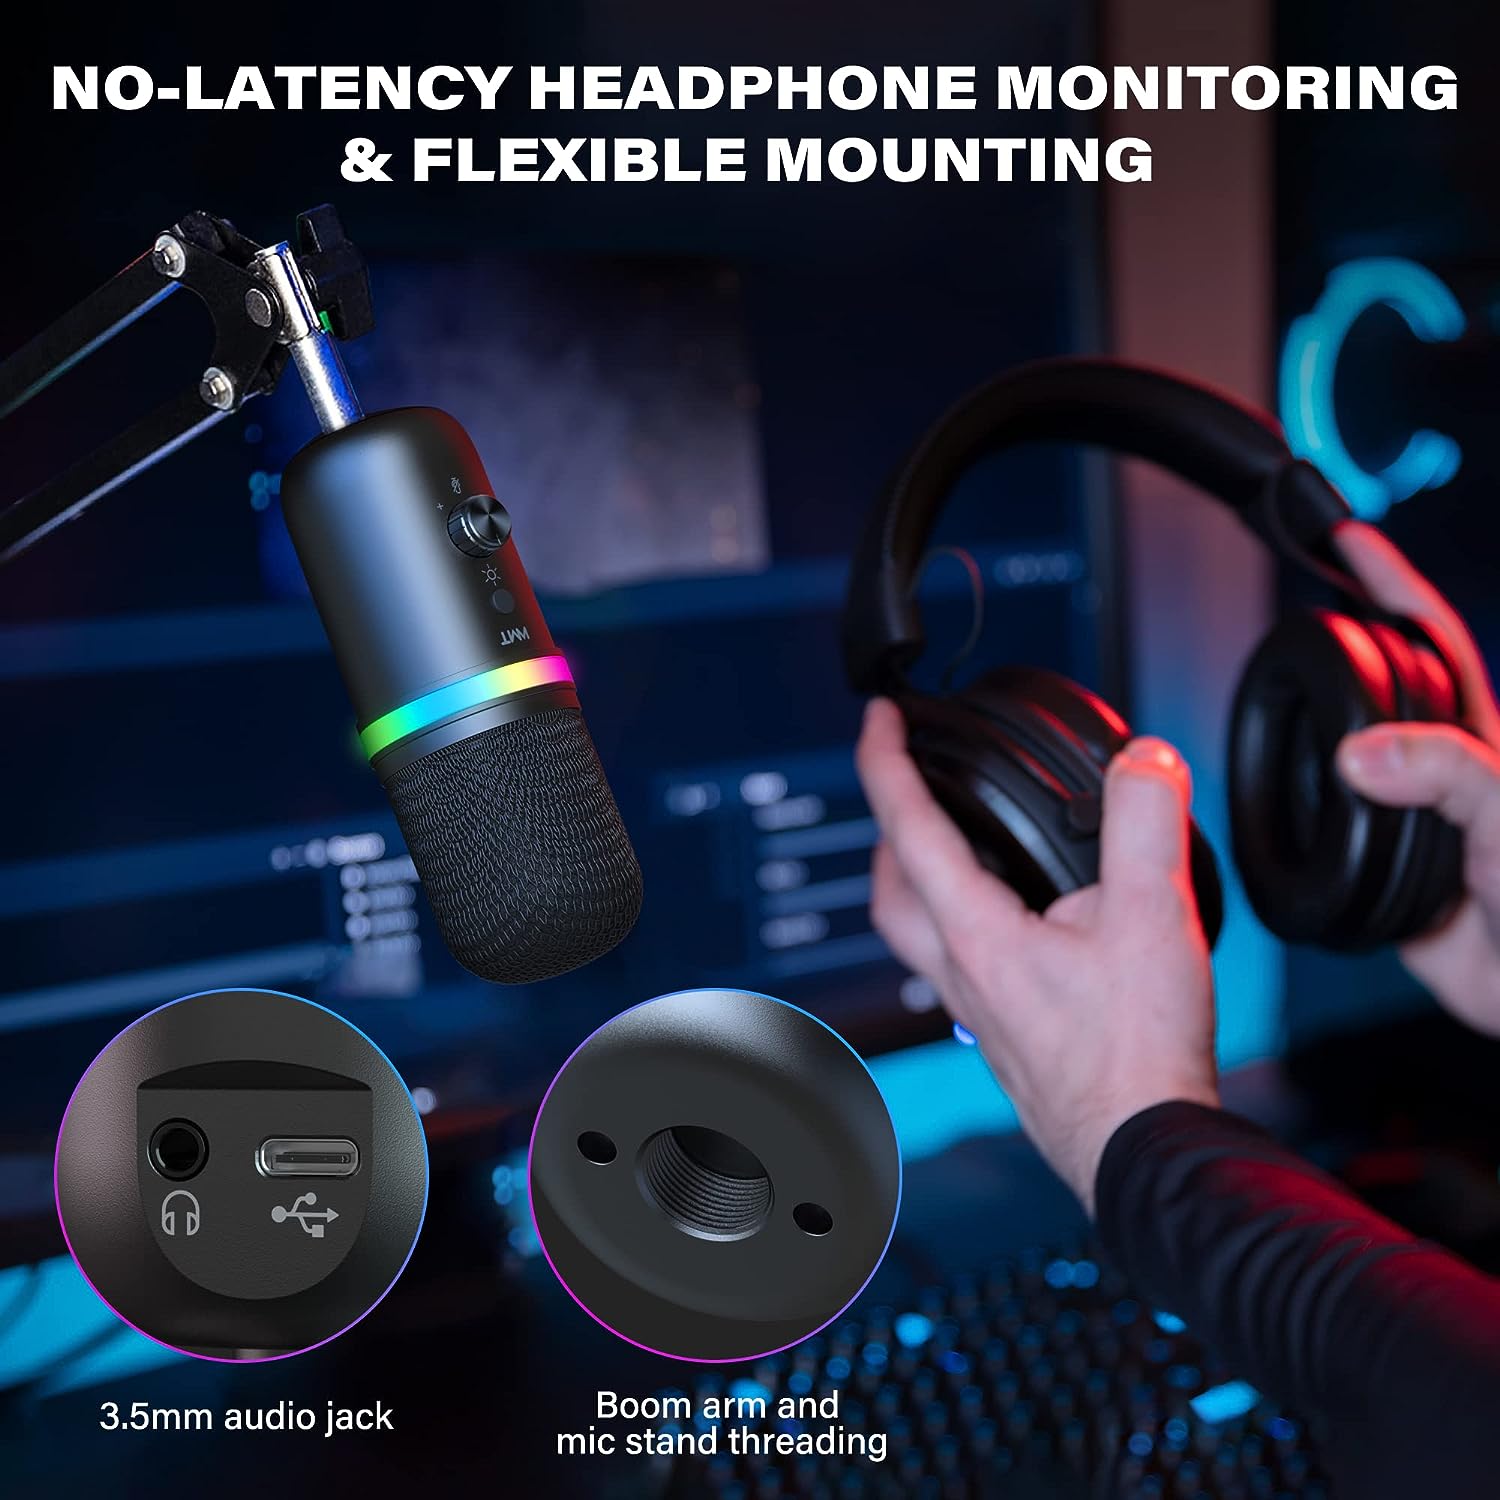 WMT USB Microphone, Condenser Gaming Microphone for PC/MAC/PS4/PS5/Phone- Cardioid Mic with Brilliant RGB Lighting Headphone Output Volume Control, Mute Button, for Streaming Podcast YouTube Discord